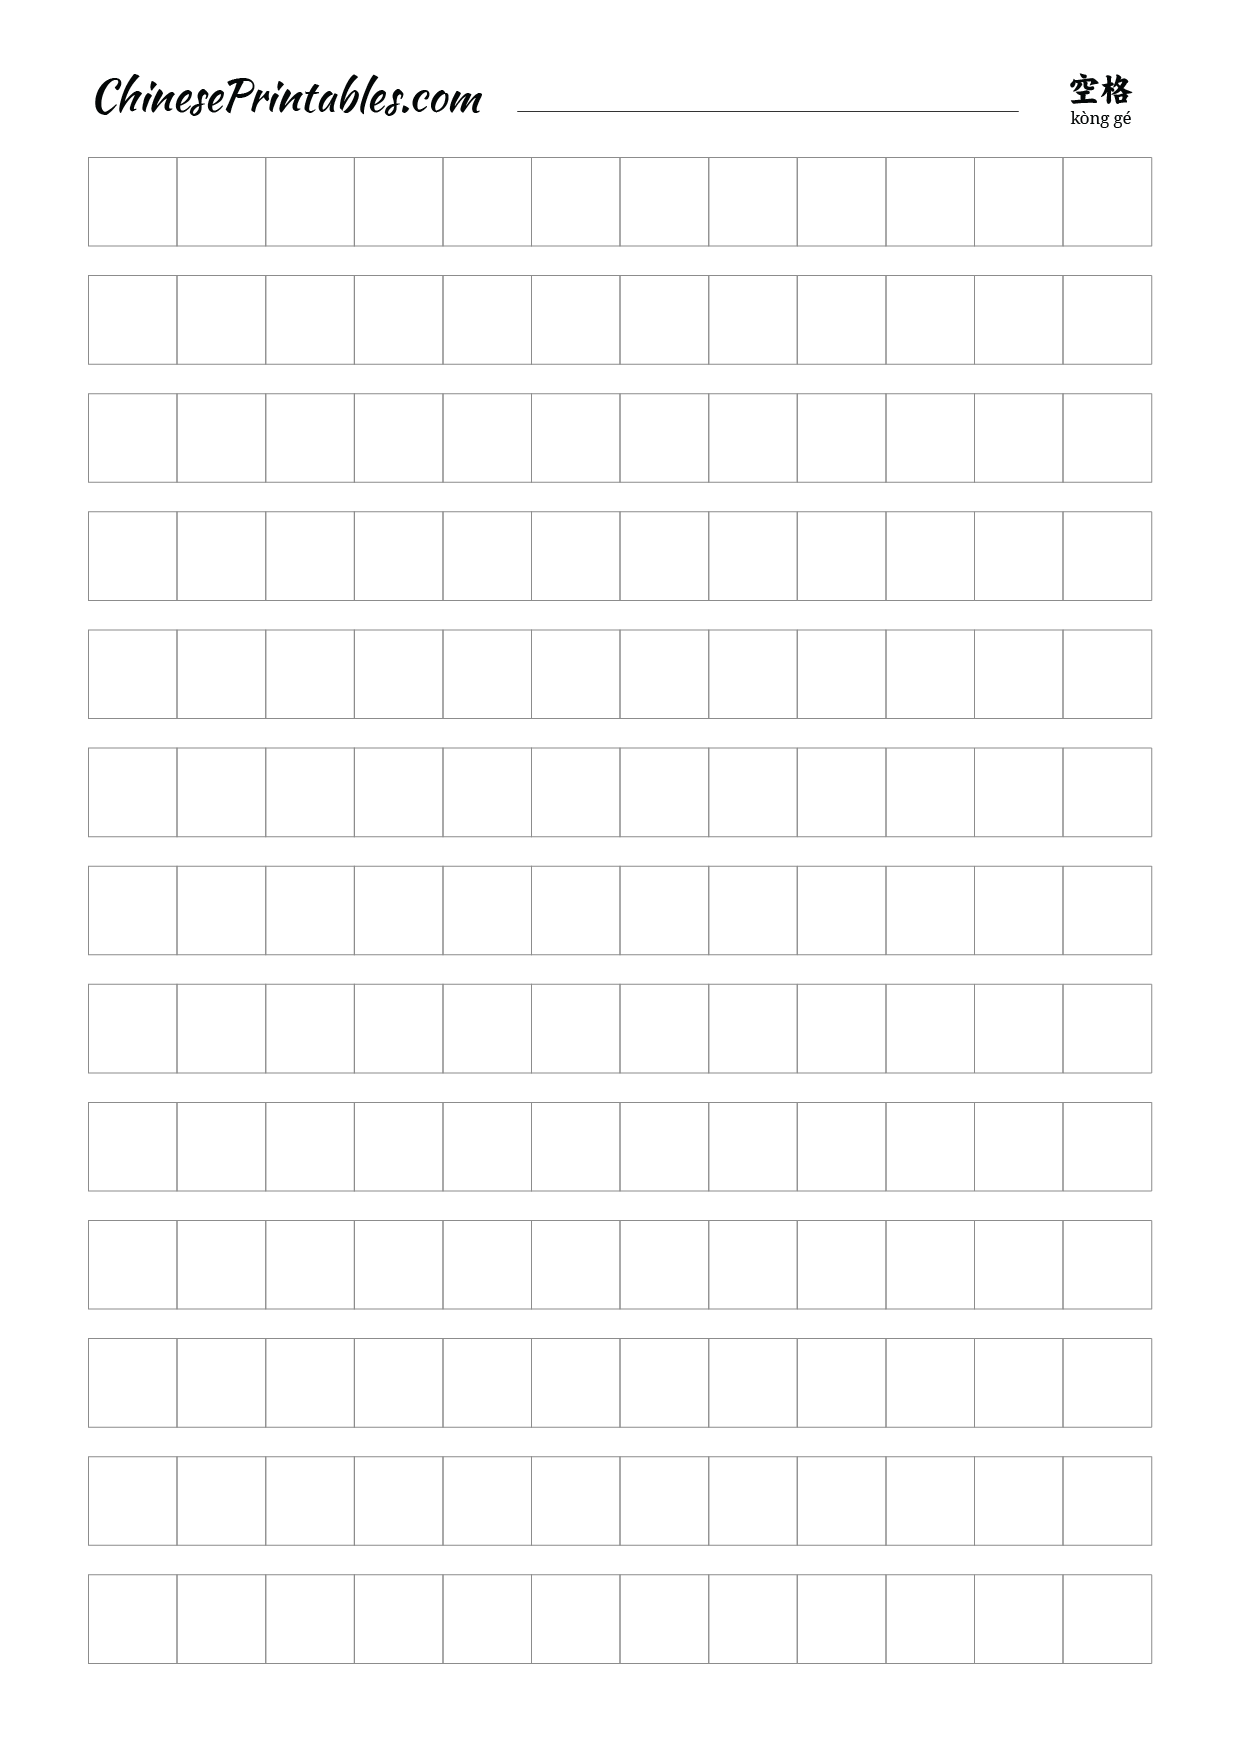 Printable Chinese Writing Grid - Printable Word Searches